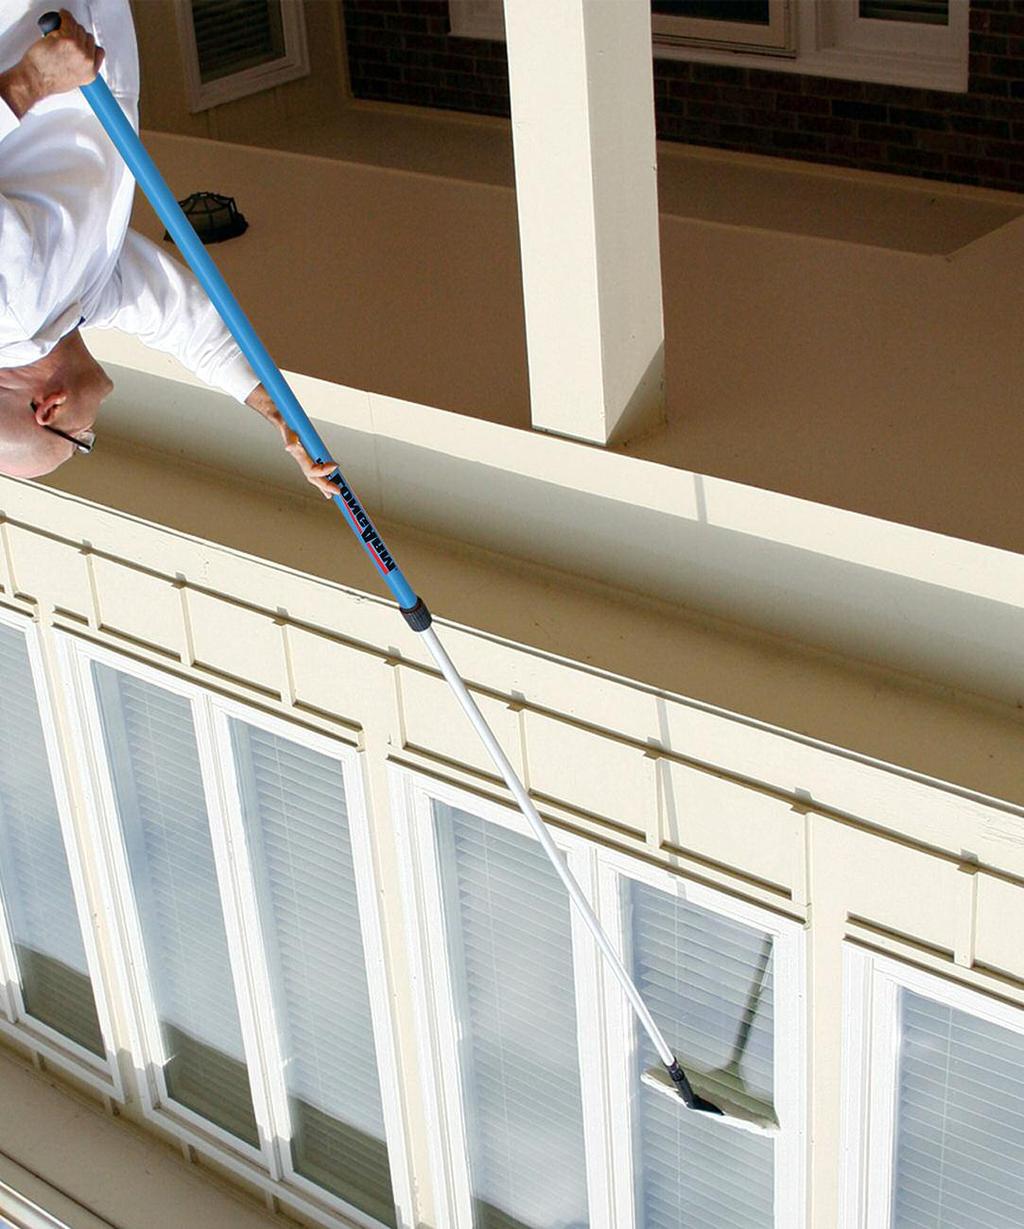 PRO-DESIGN WINDOW CLEANING TOOLS CLEAN WINDOWS LIKE A PRO. The ProDesign handle swivels to clean curves and angles easier than ordinary squeegee handles.